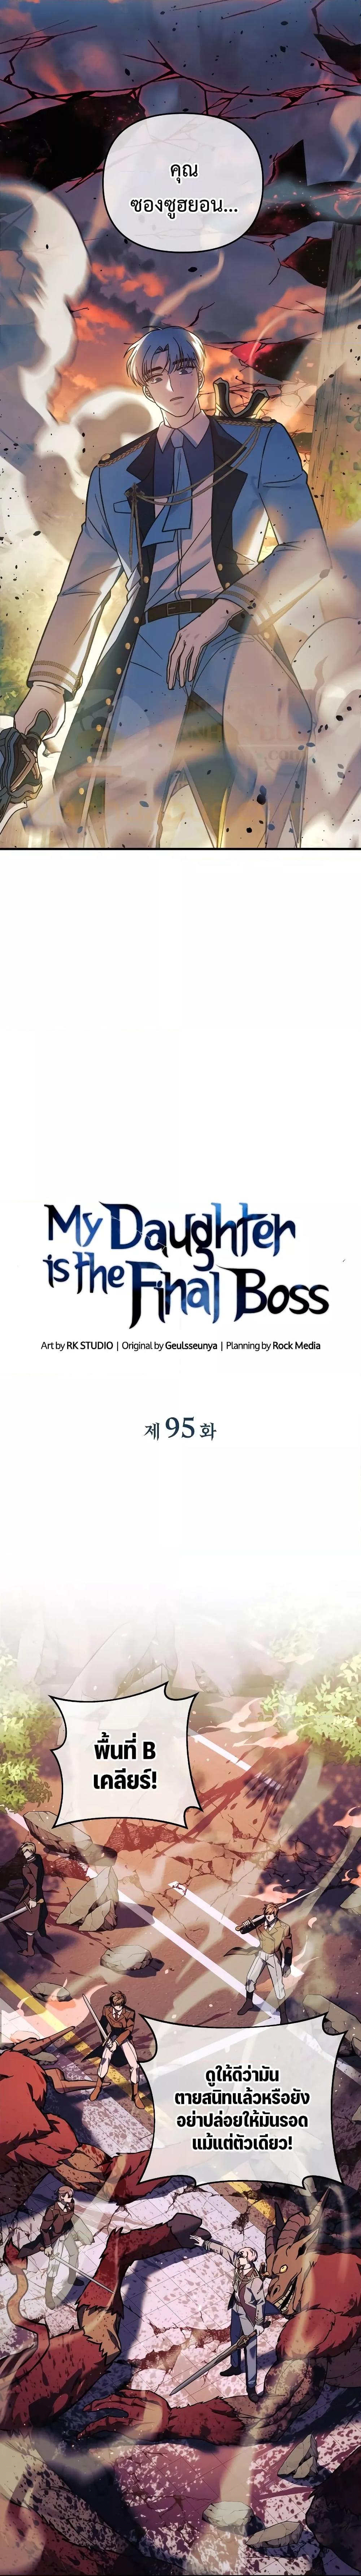 My Daughter is the Final Boss 95 13